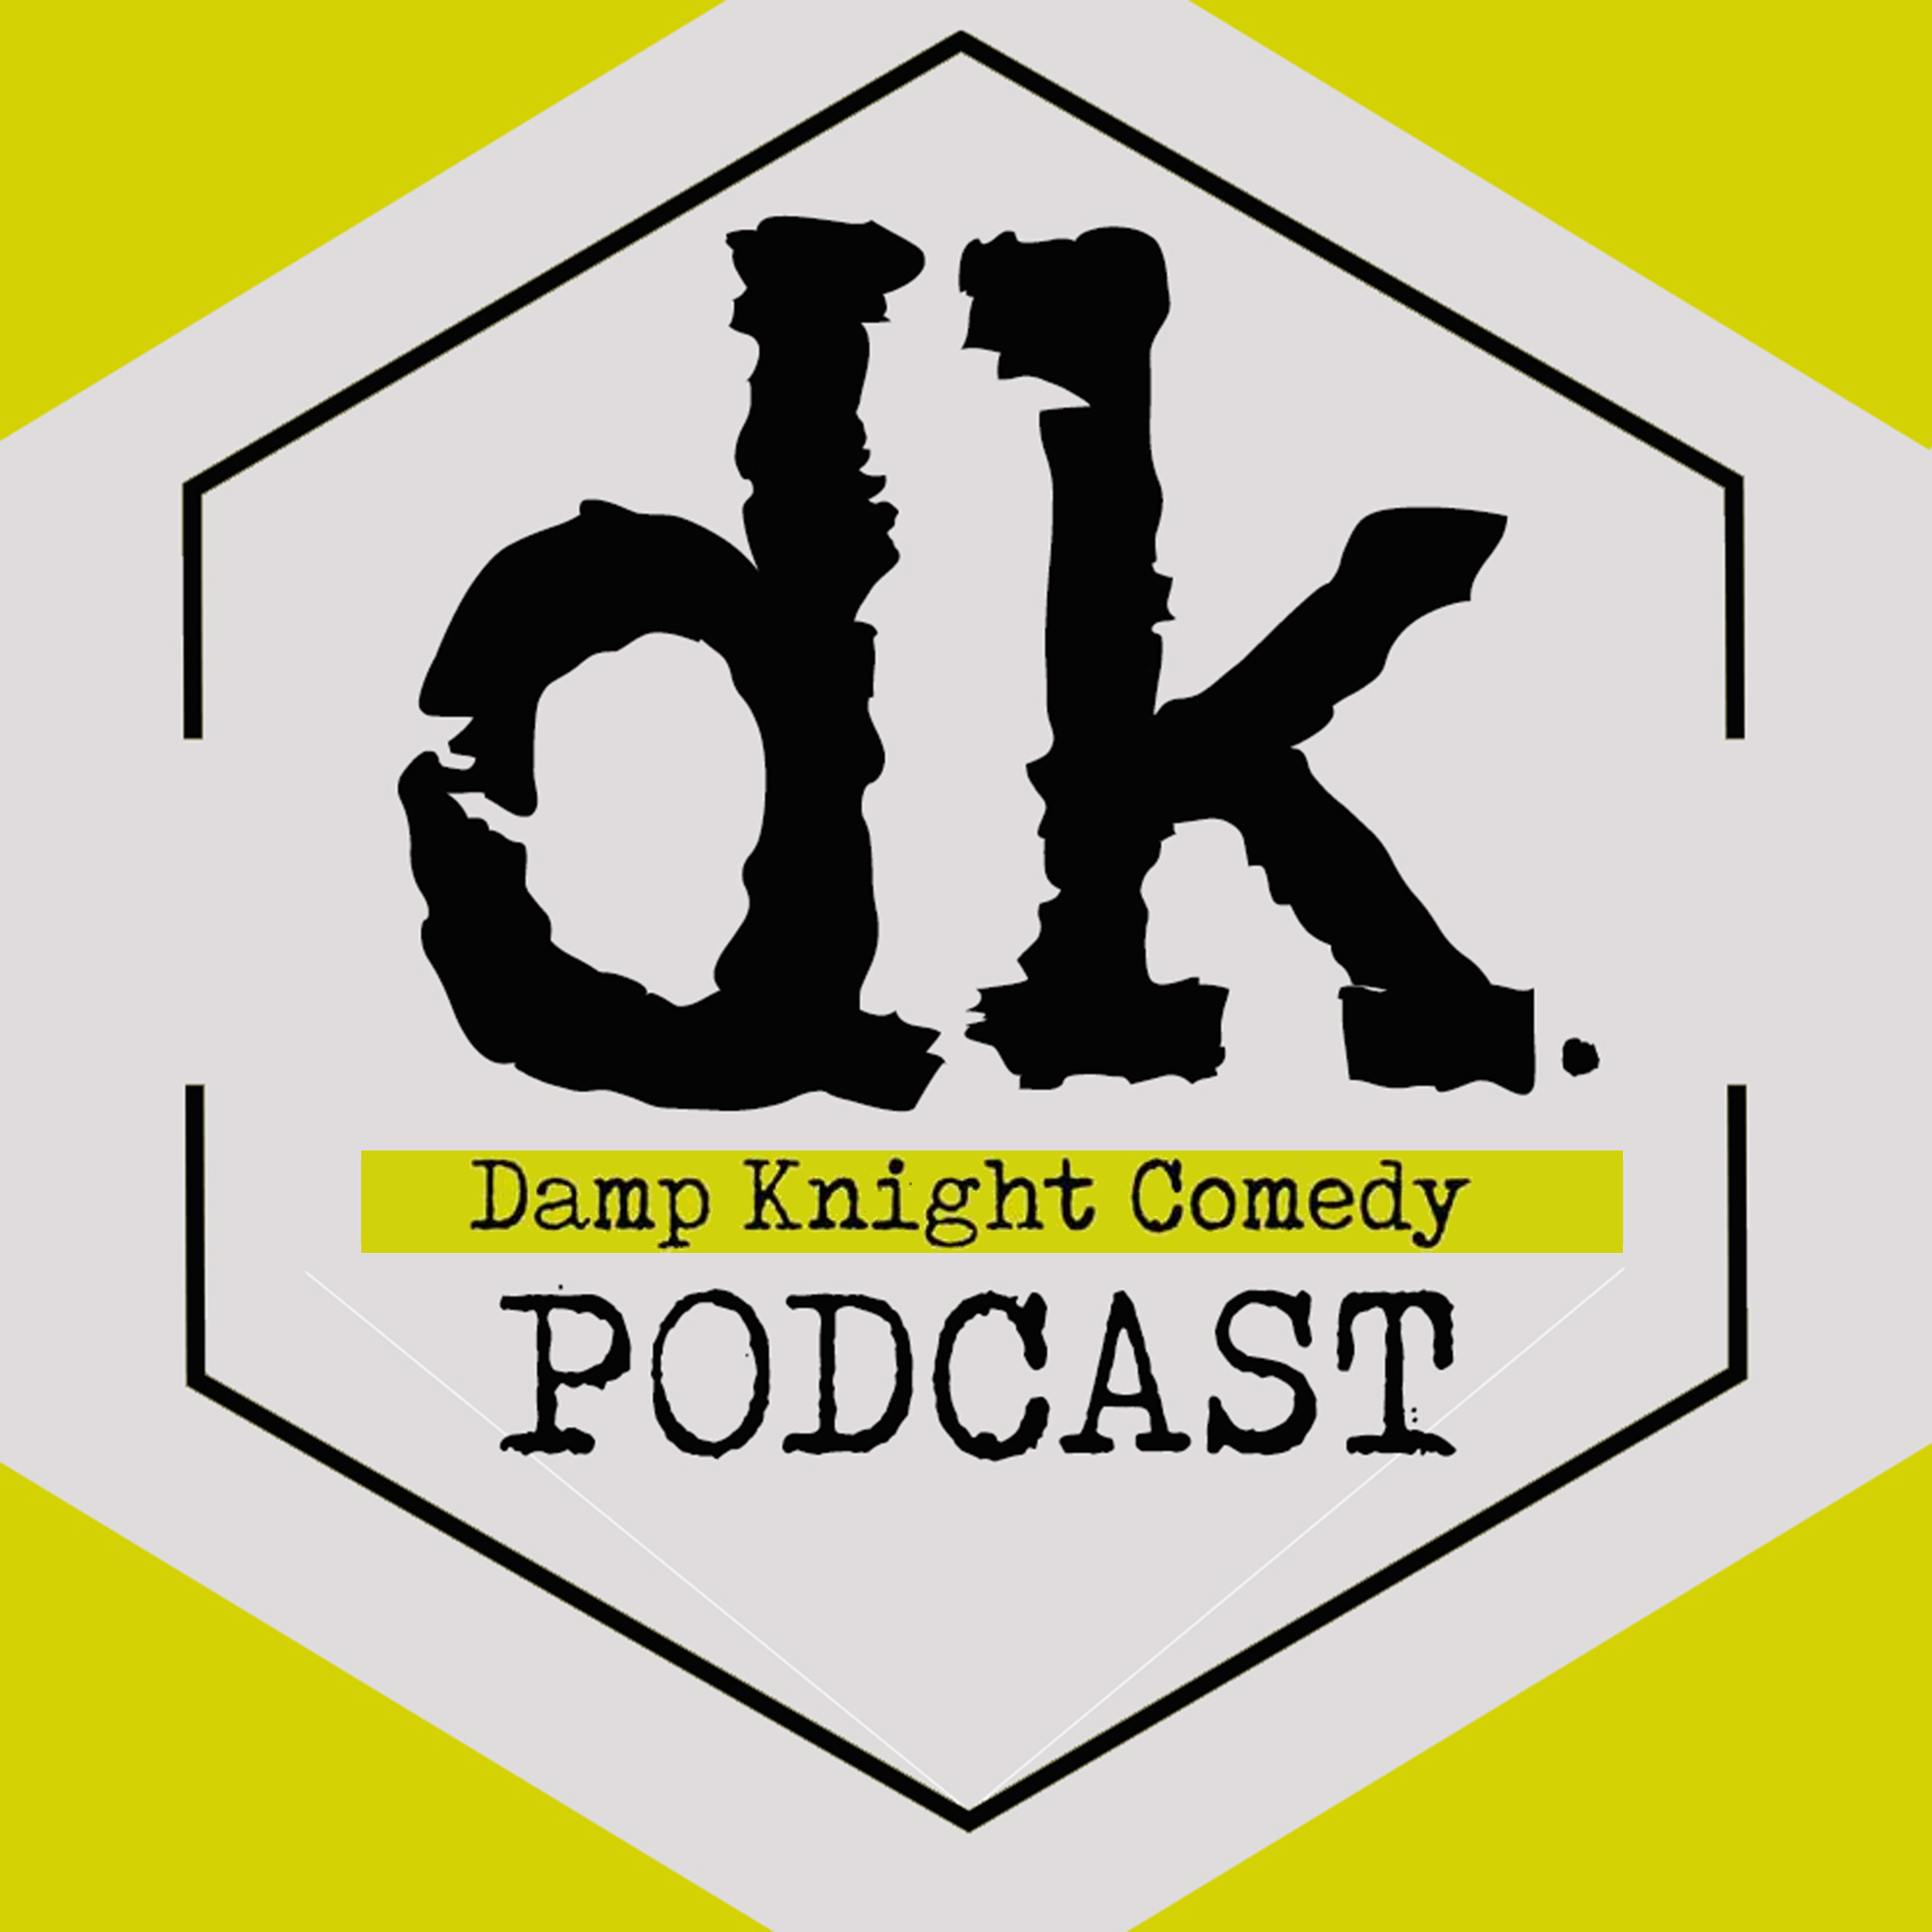 DK Podcast EP 54 - Ready, Steady (Wait For It)